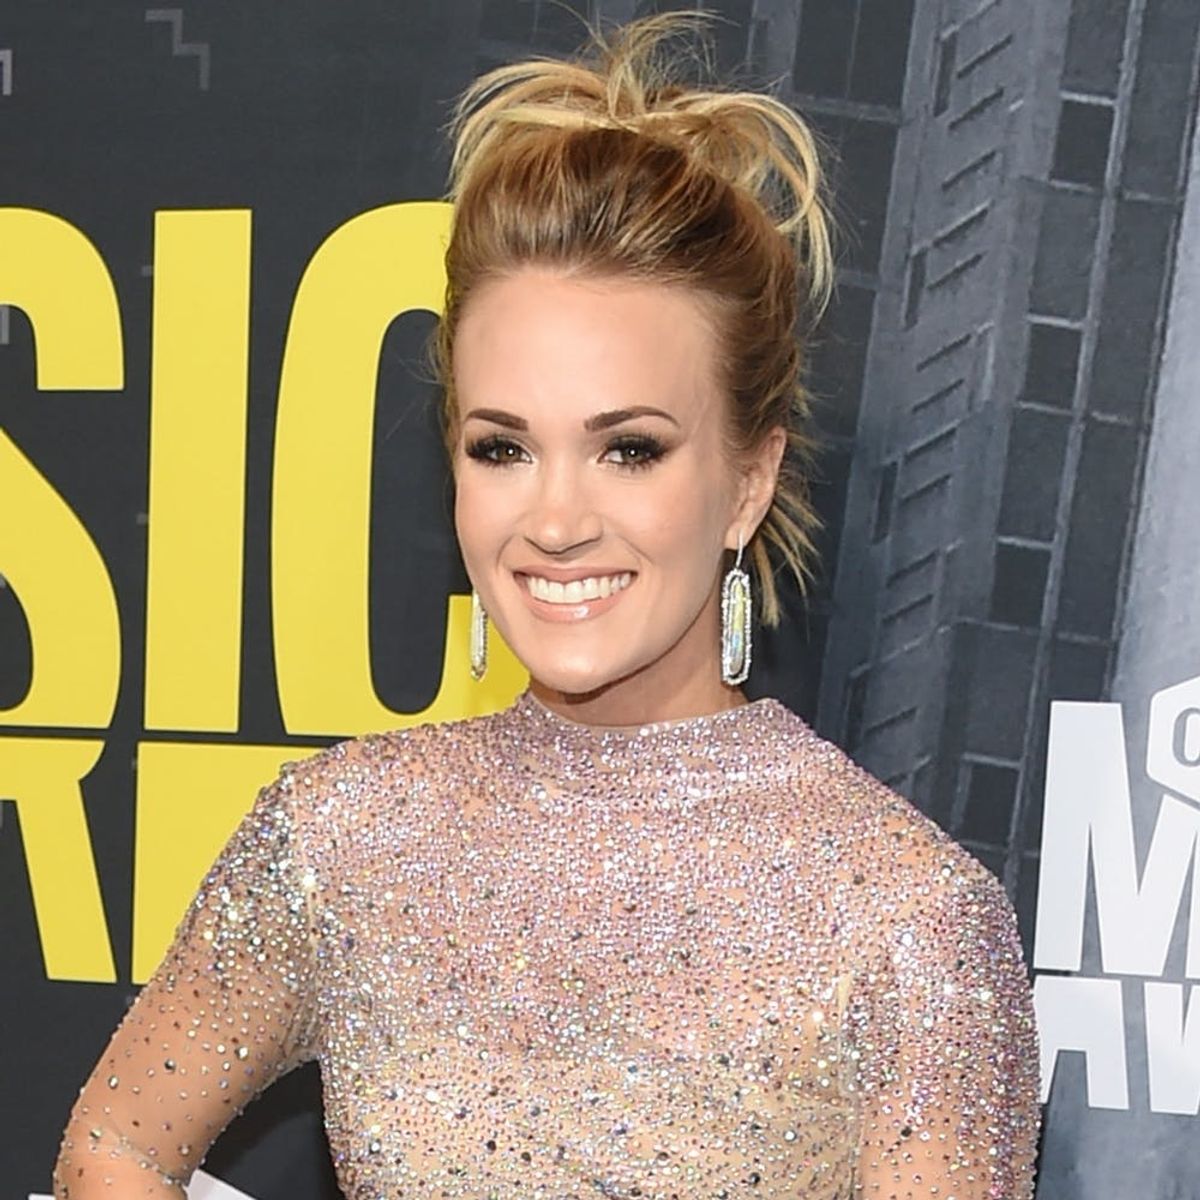 Carrie Underwood Had to Have Surgery on Her Broken Wrist